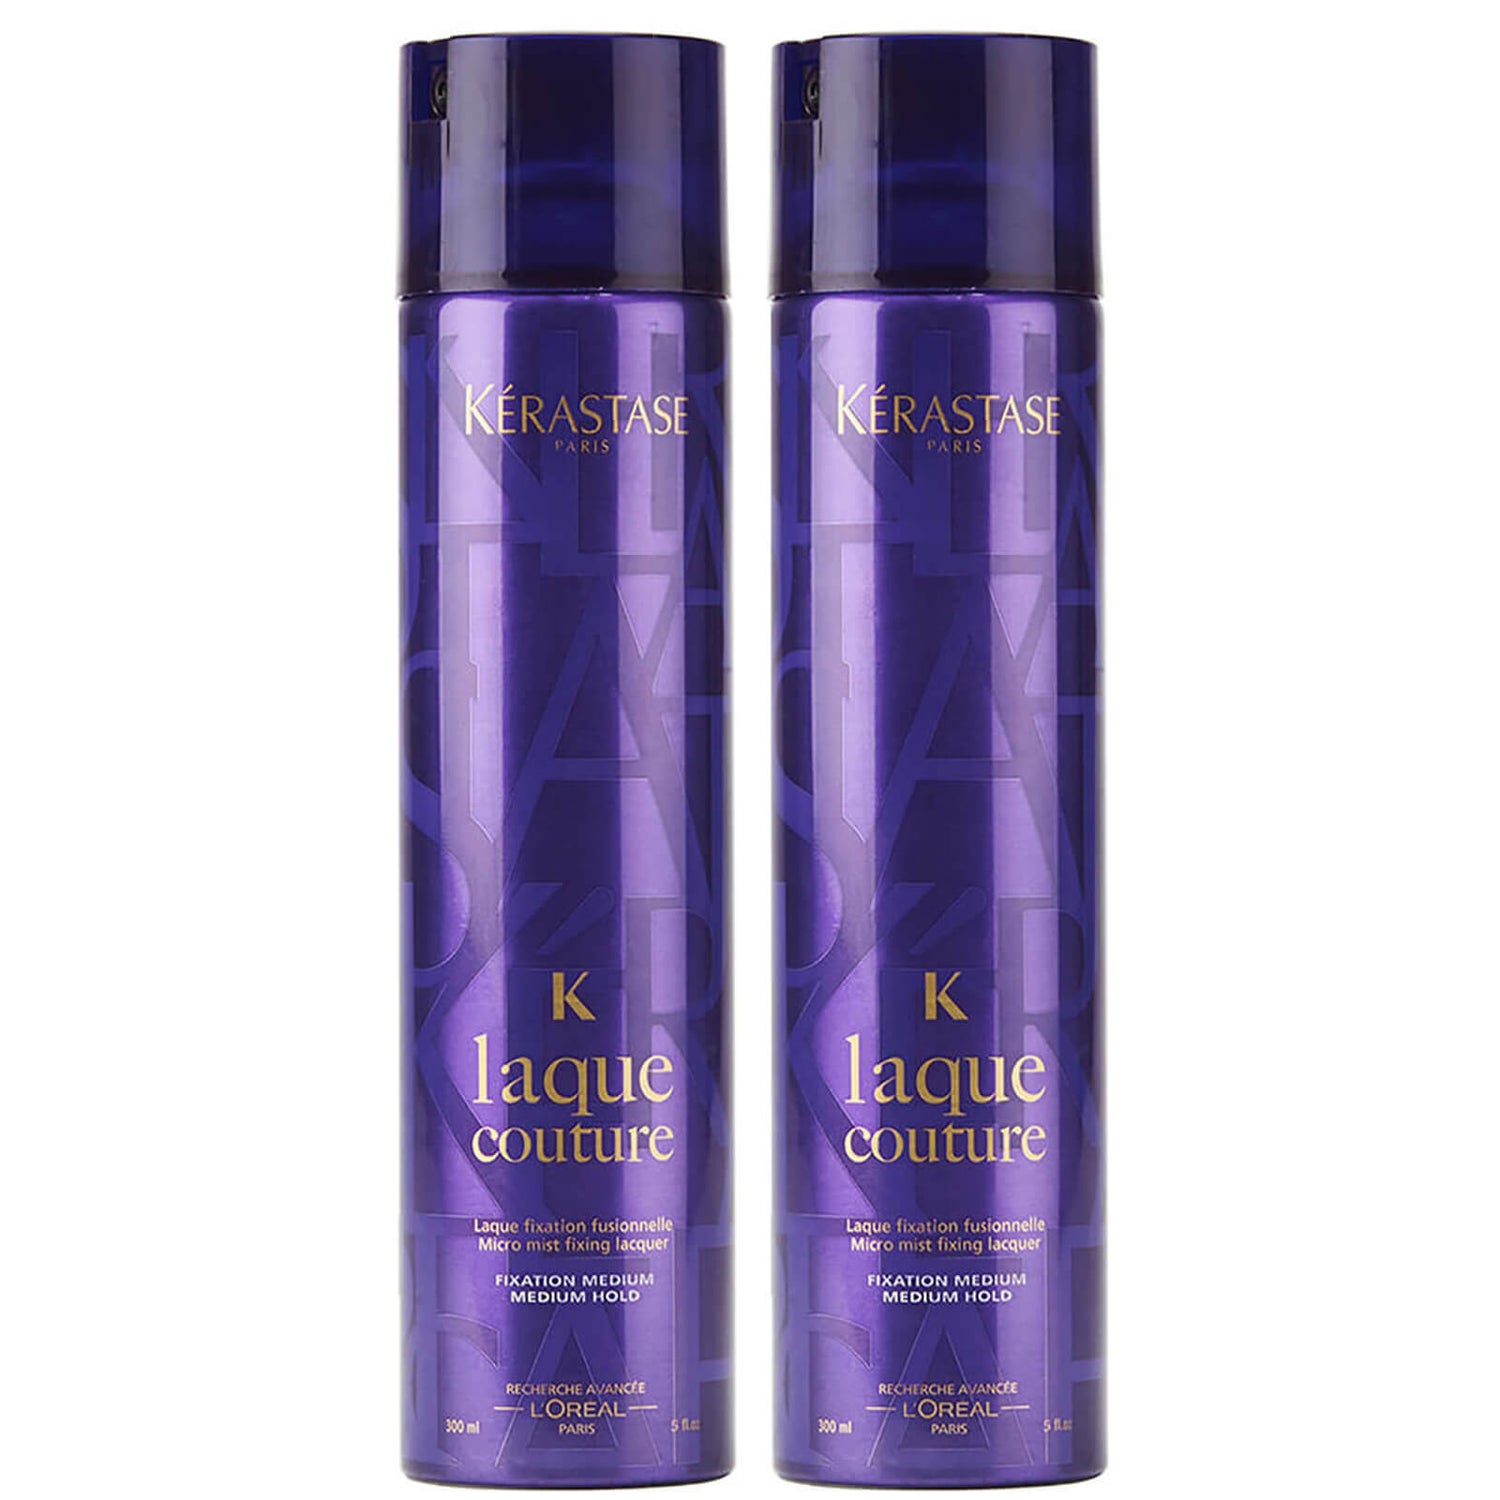 Kérastase Styling Laque Couture 300ml Duo